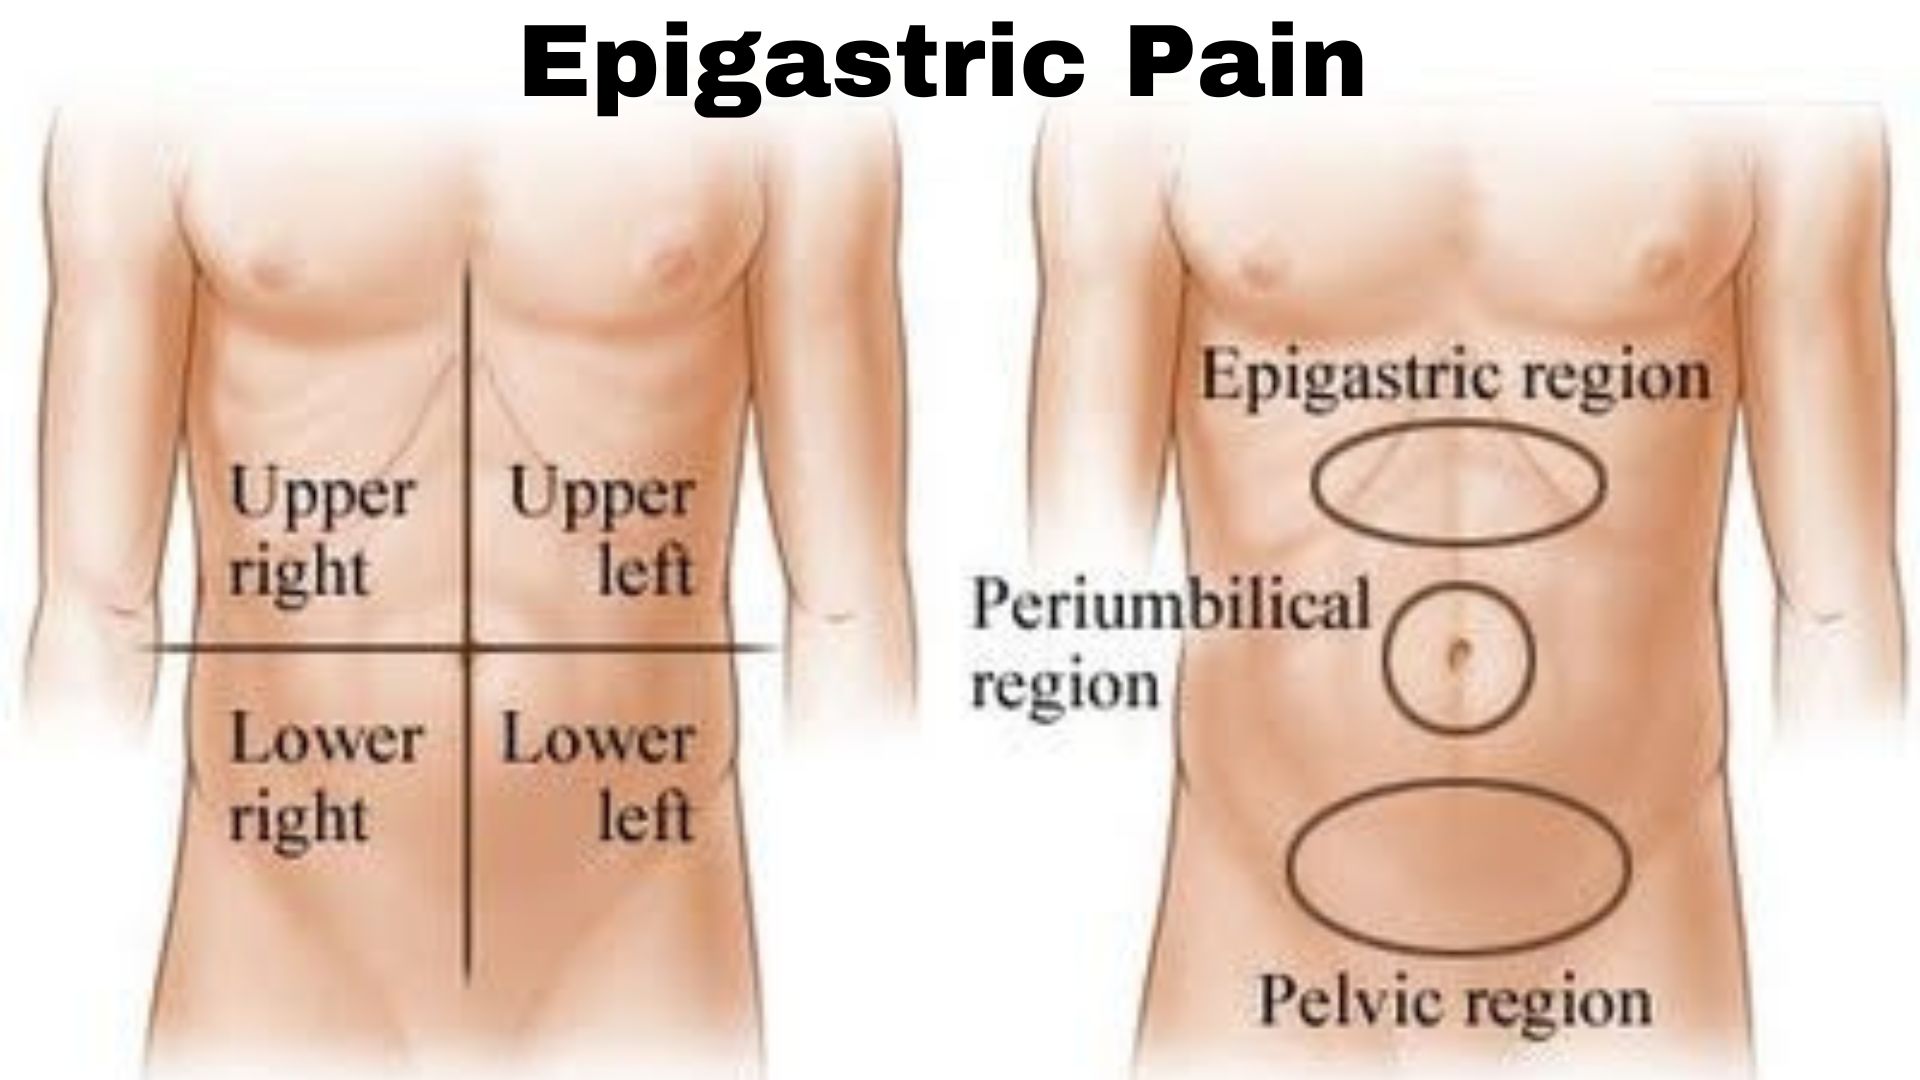 Epigastric Pain ICD 10